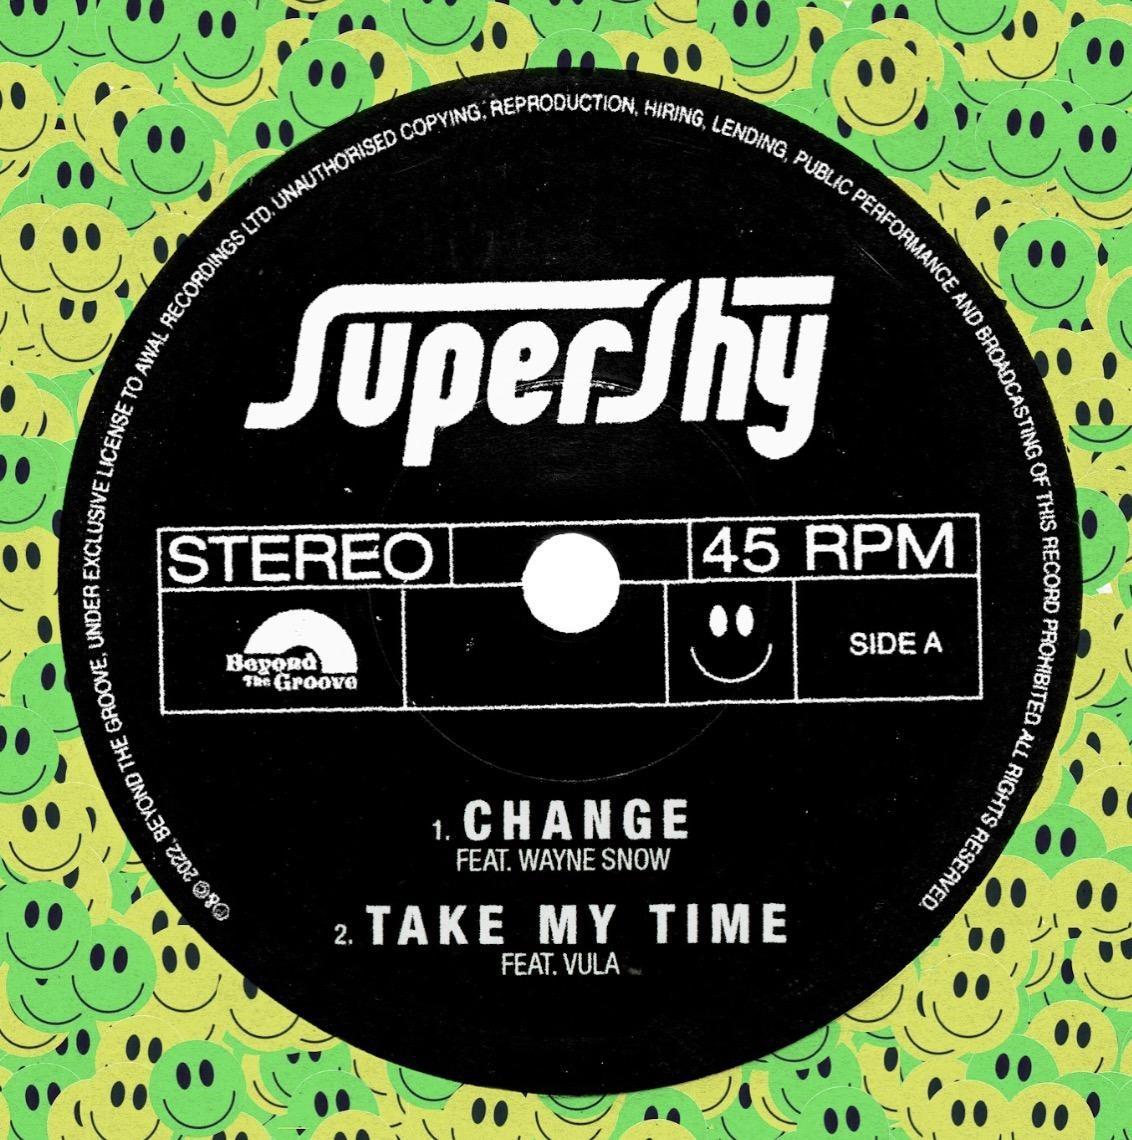 Supershy Releases Two Brand New Singles “Change/Take My Time”, Yours Truly, News, January 30, 2023